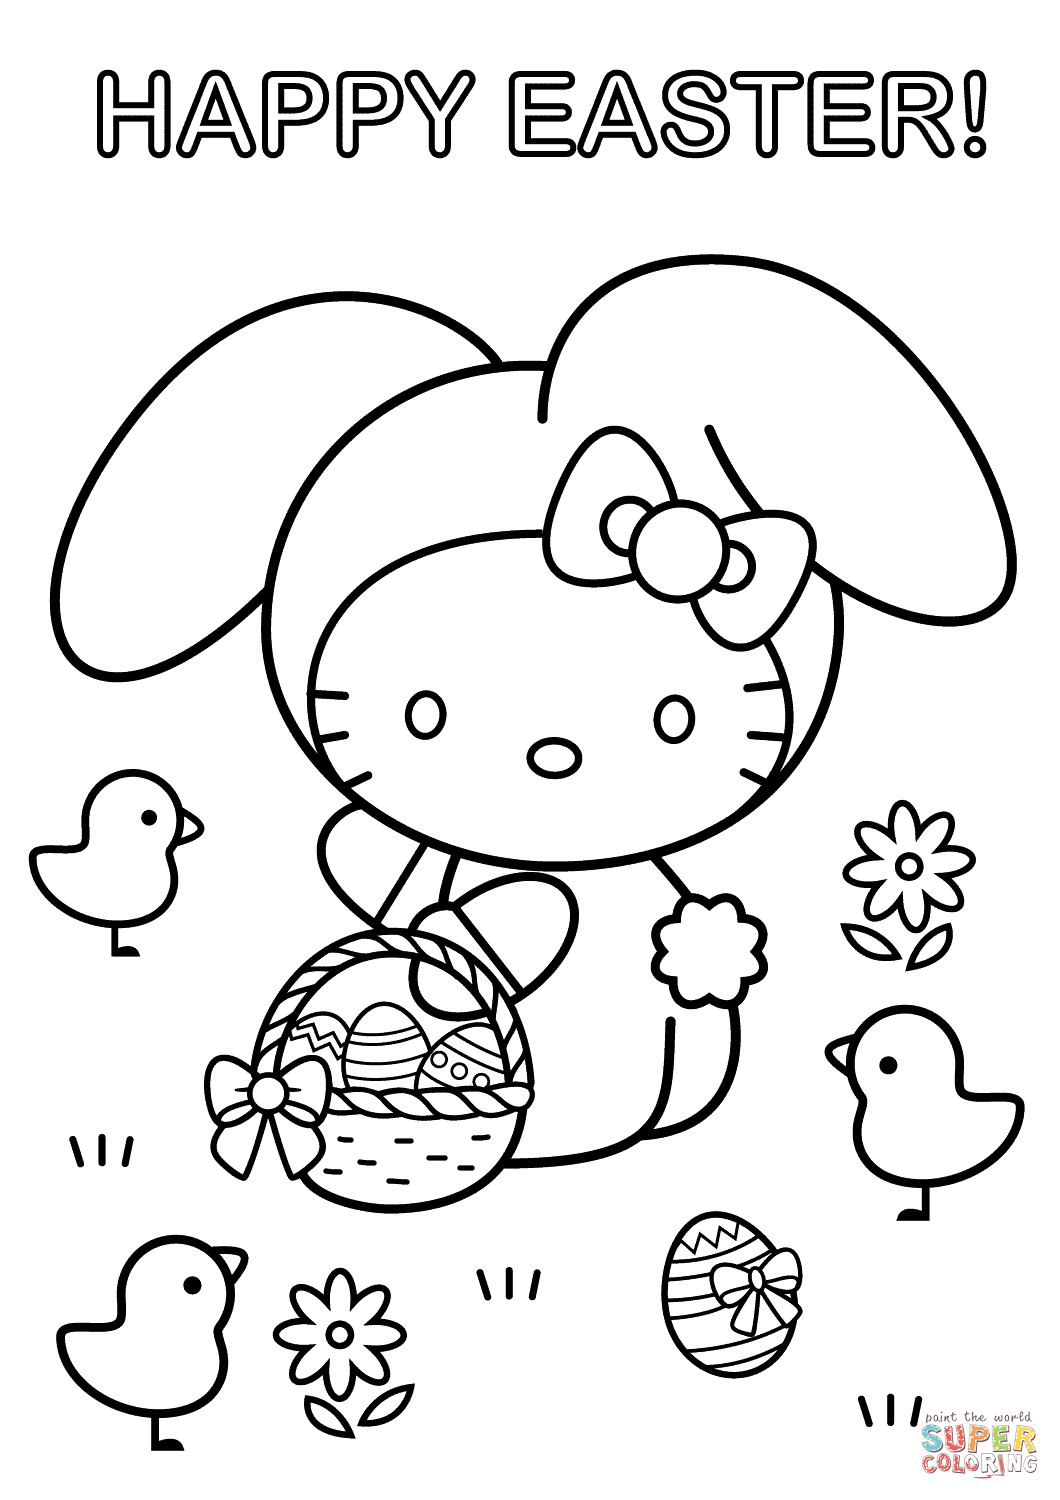 Happy Easter Coloring Pages Free Printable
 Hello Kitty Happy Easter coloring page